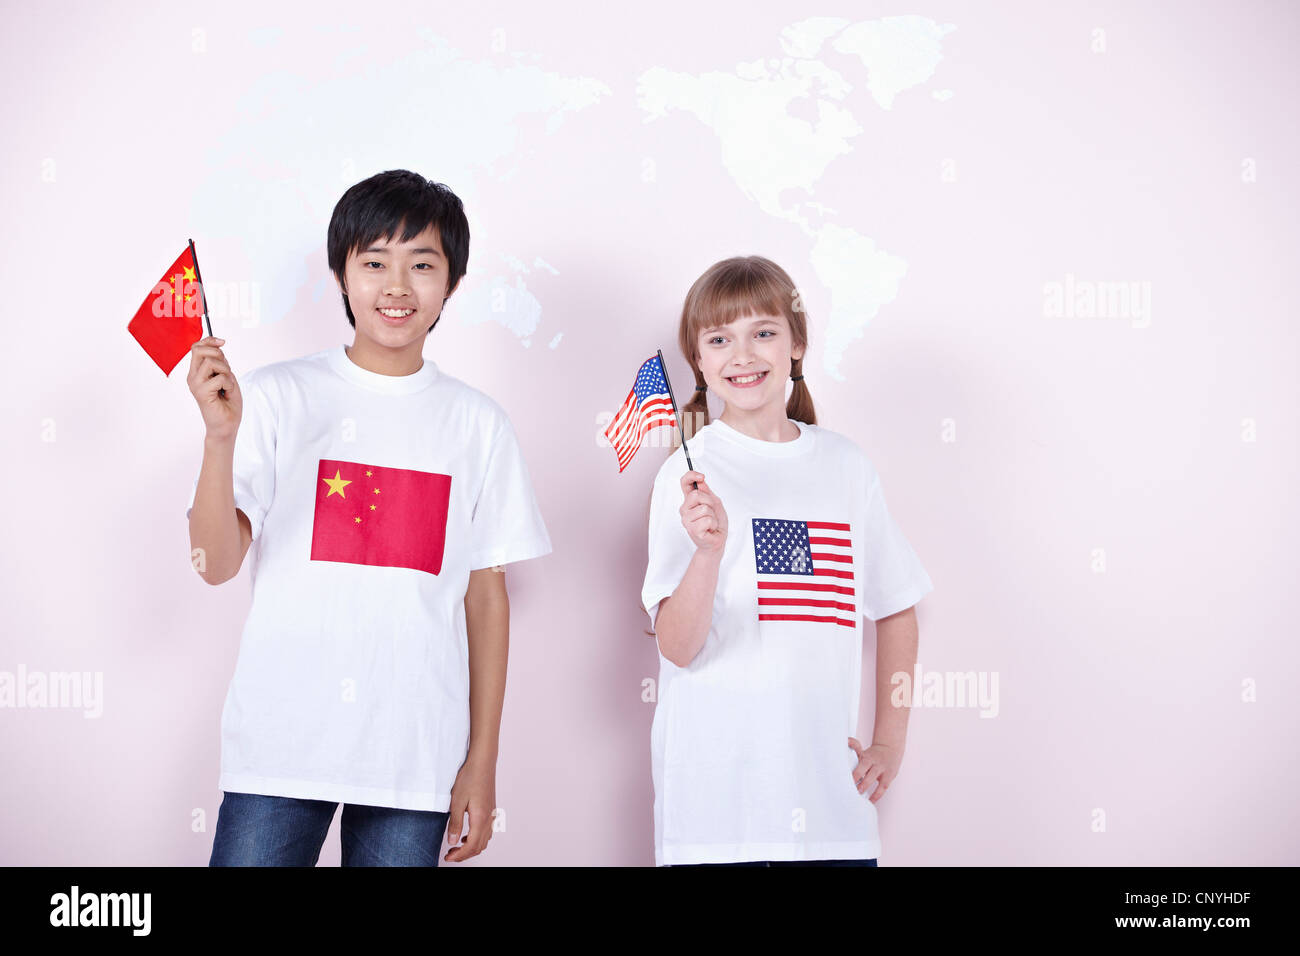 The global students with China and U.S.A. flag Stock Photo